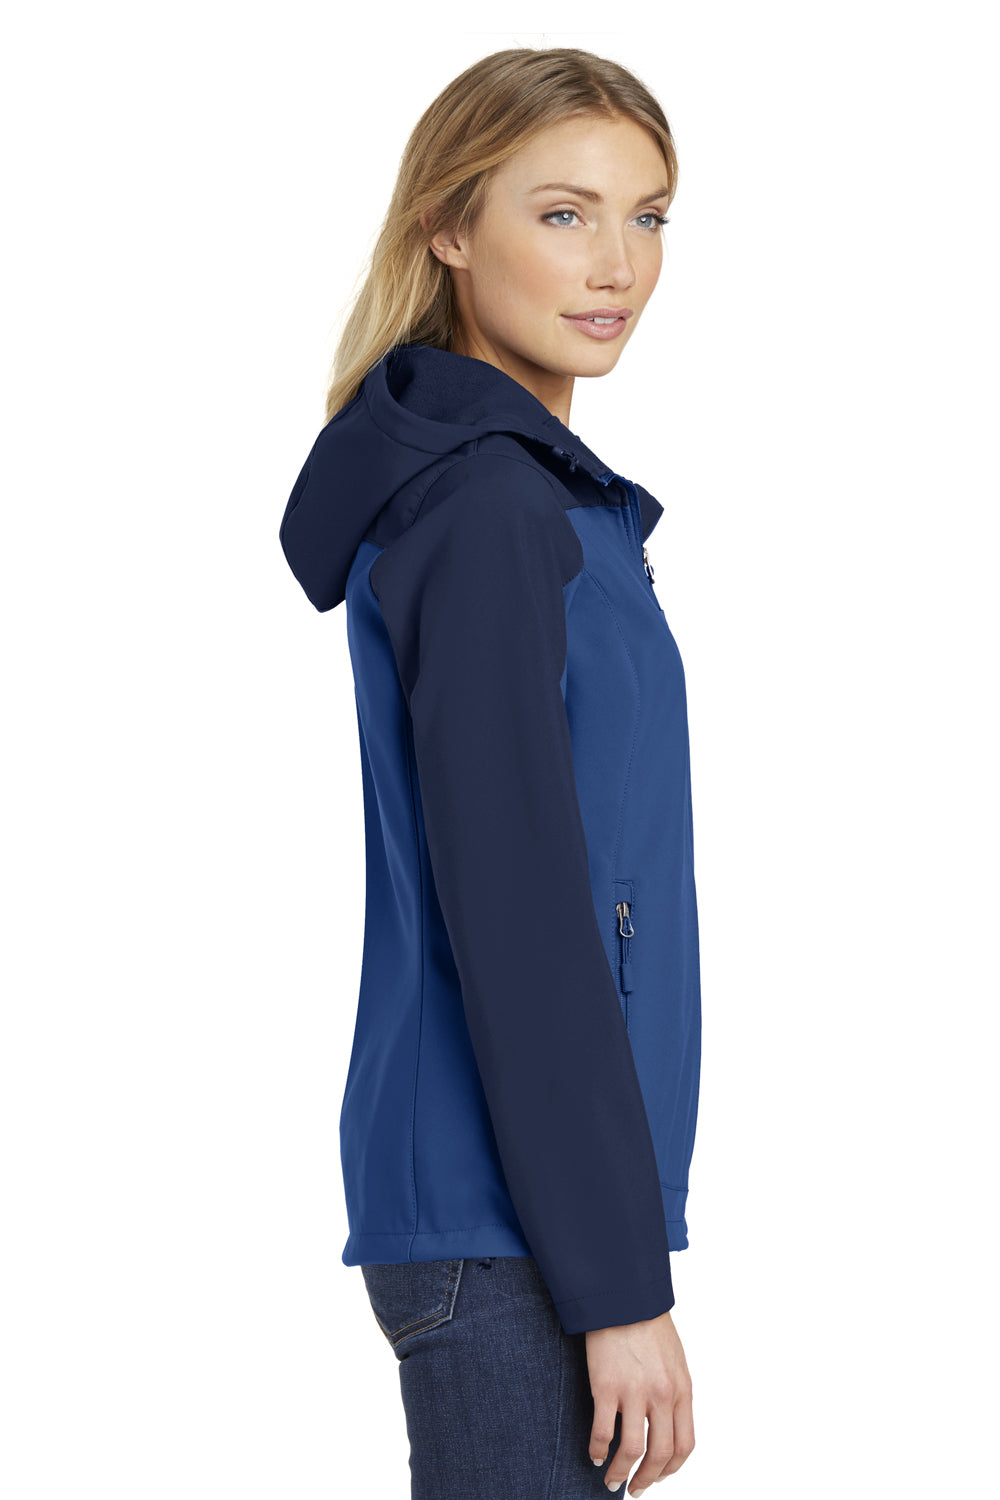 Port Authority L335 Womens Core Wind & Water Resistant Full Zip Hooded Jacket Royal Blue/Navy Blue Side